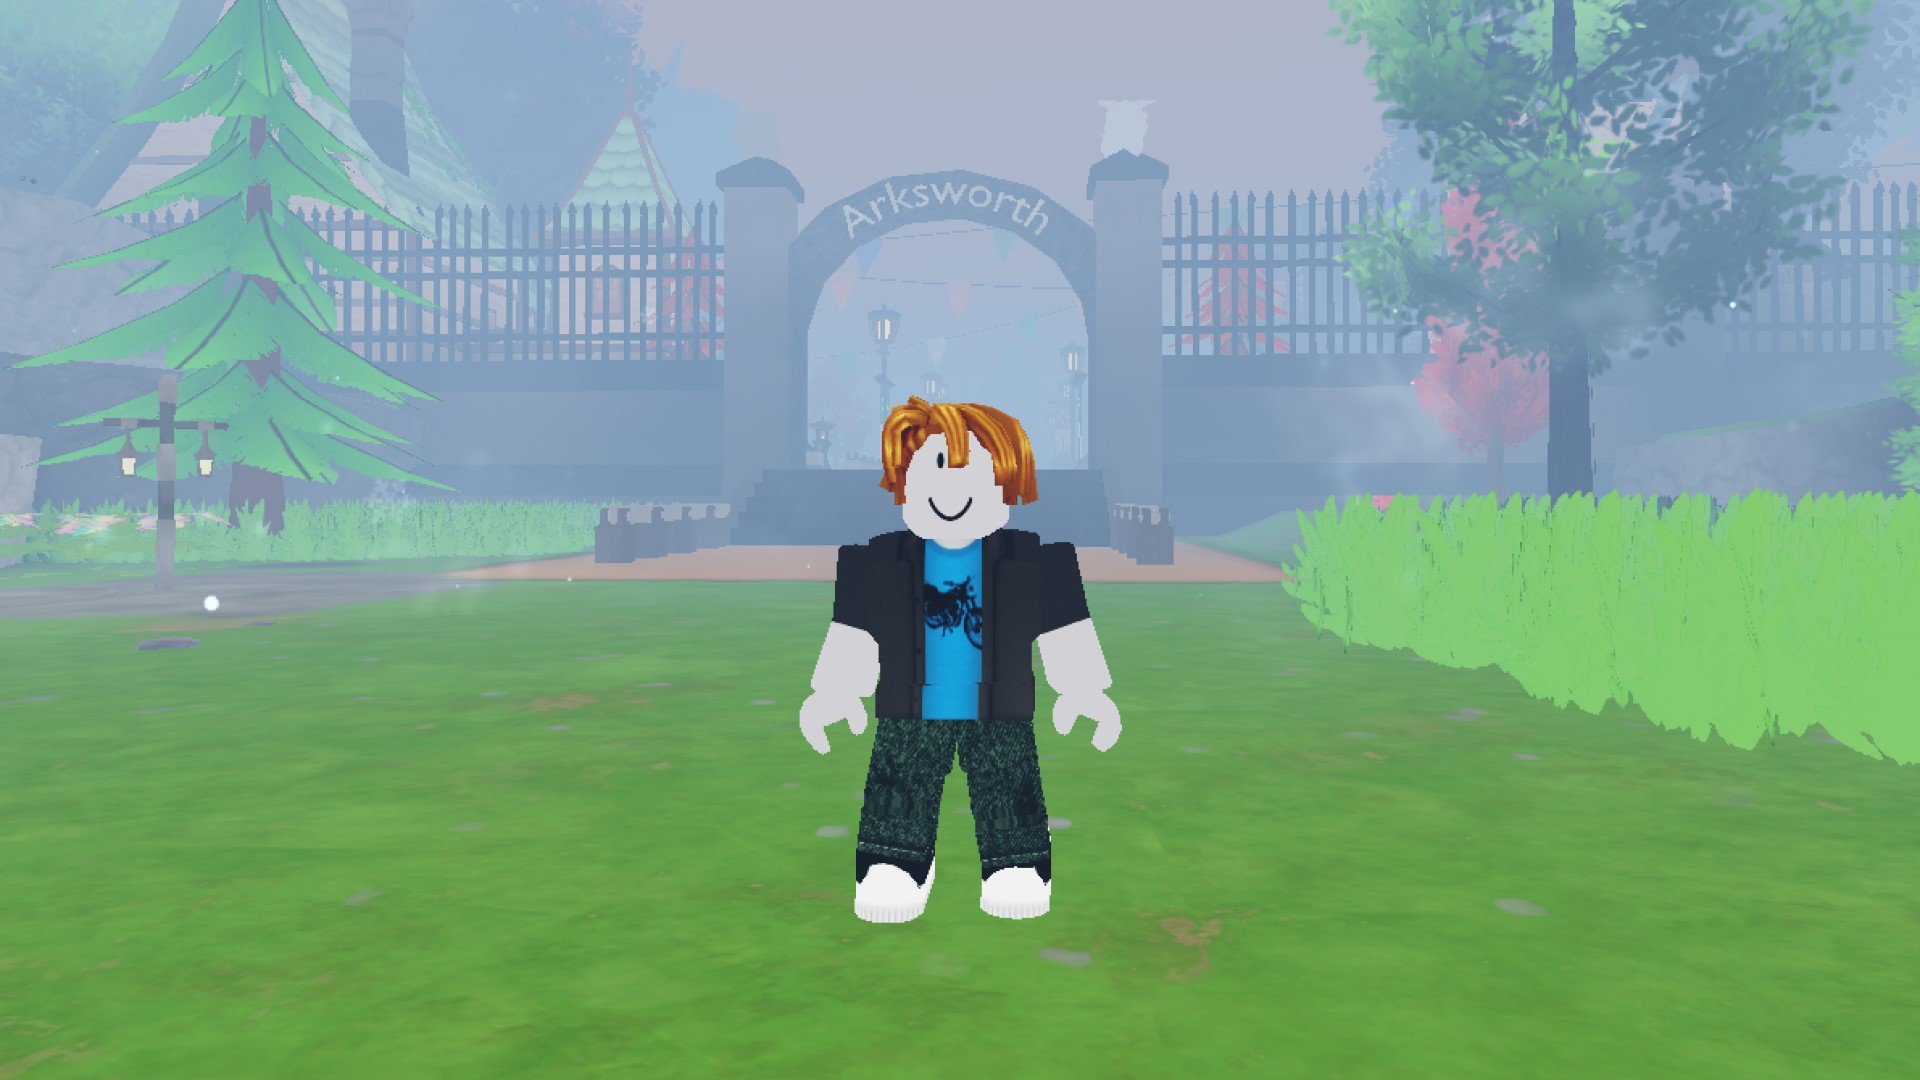 A character from Roblox game Tales of Tanorio standing in front of the entrance to Arksworth.